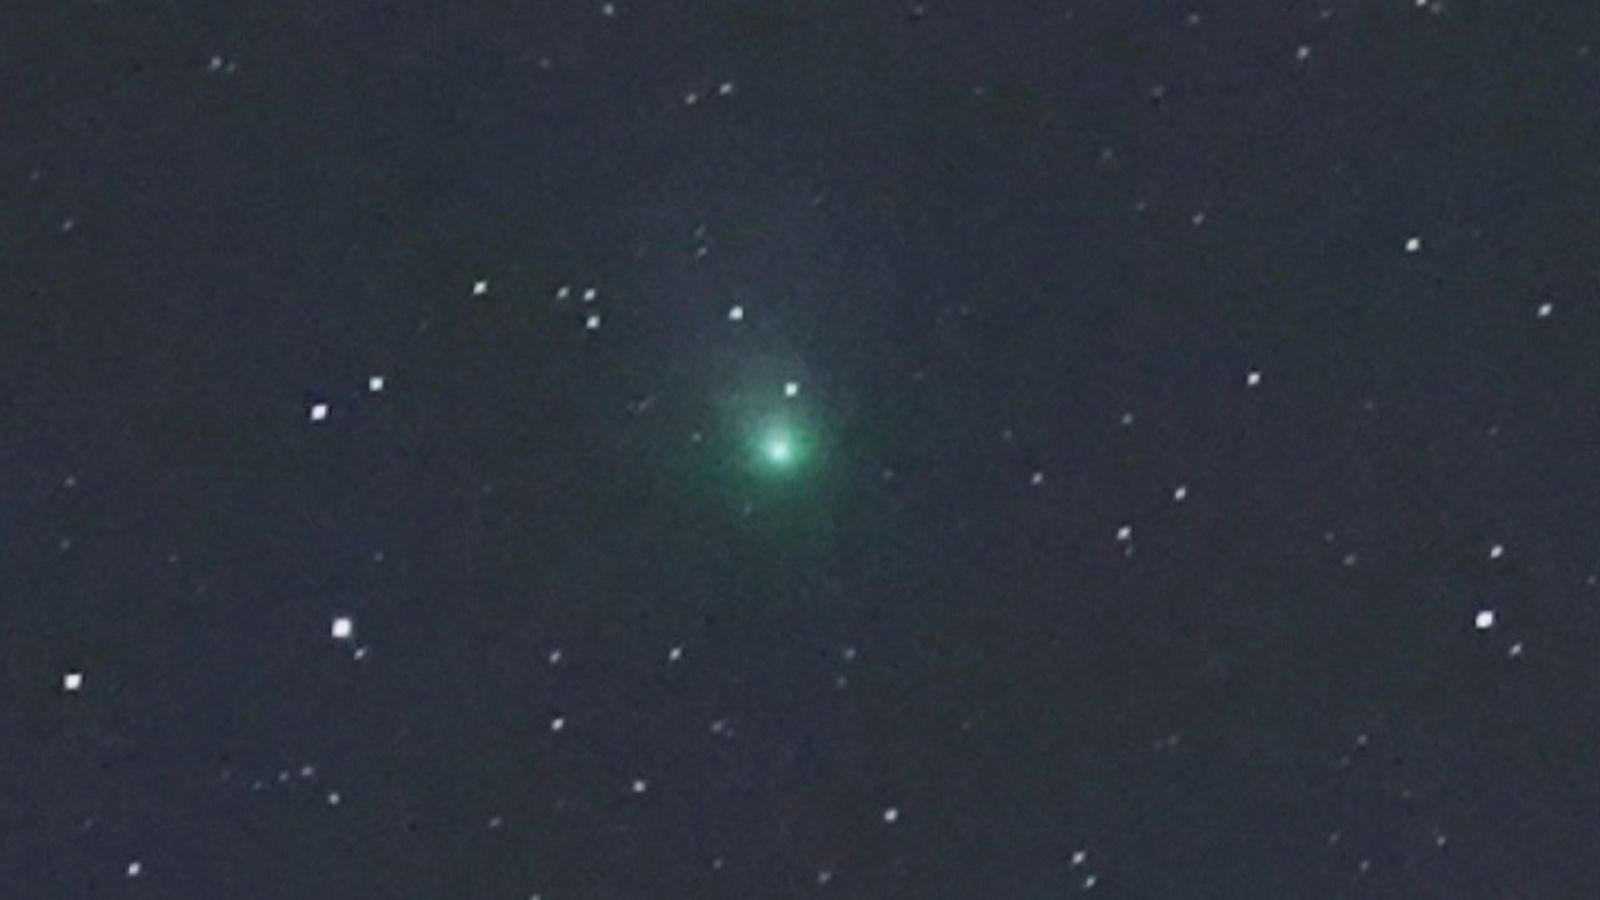 It's your best chance to spot a onceinalifetime green comet here's